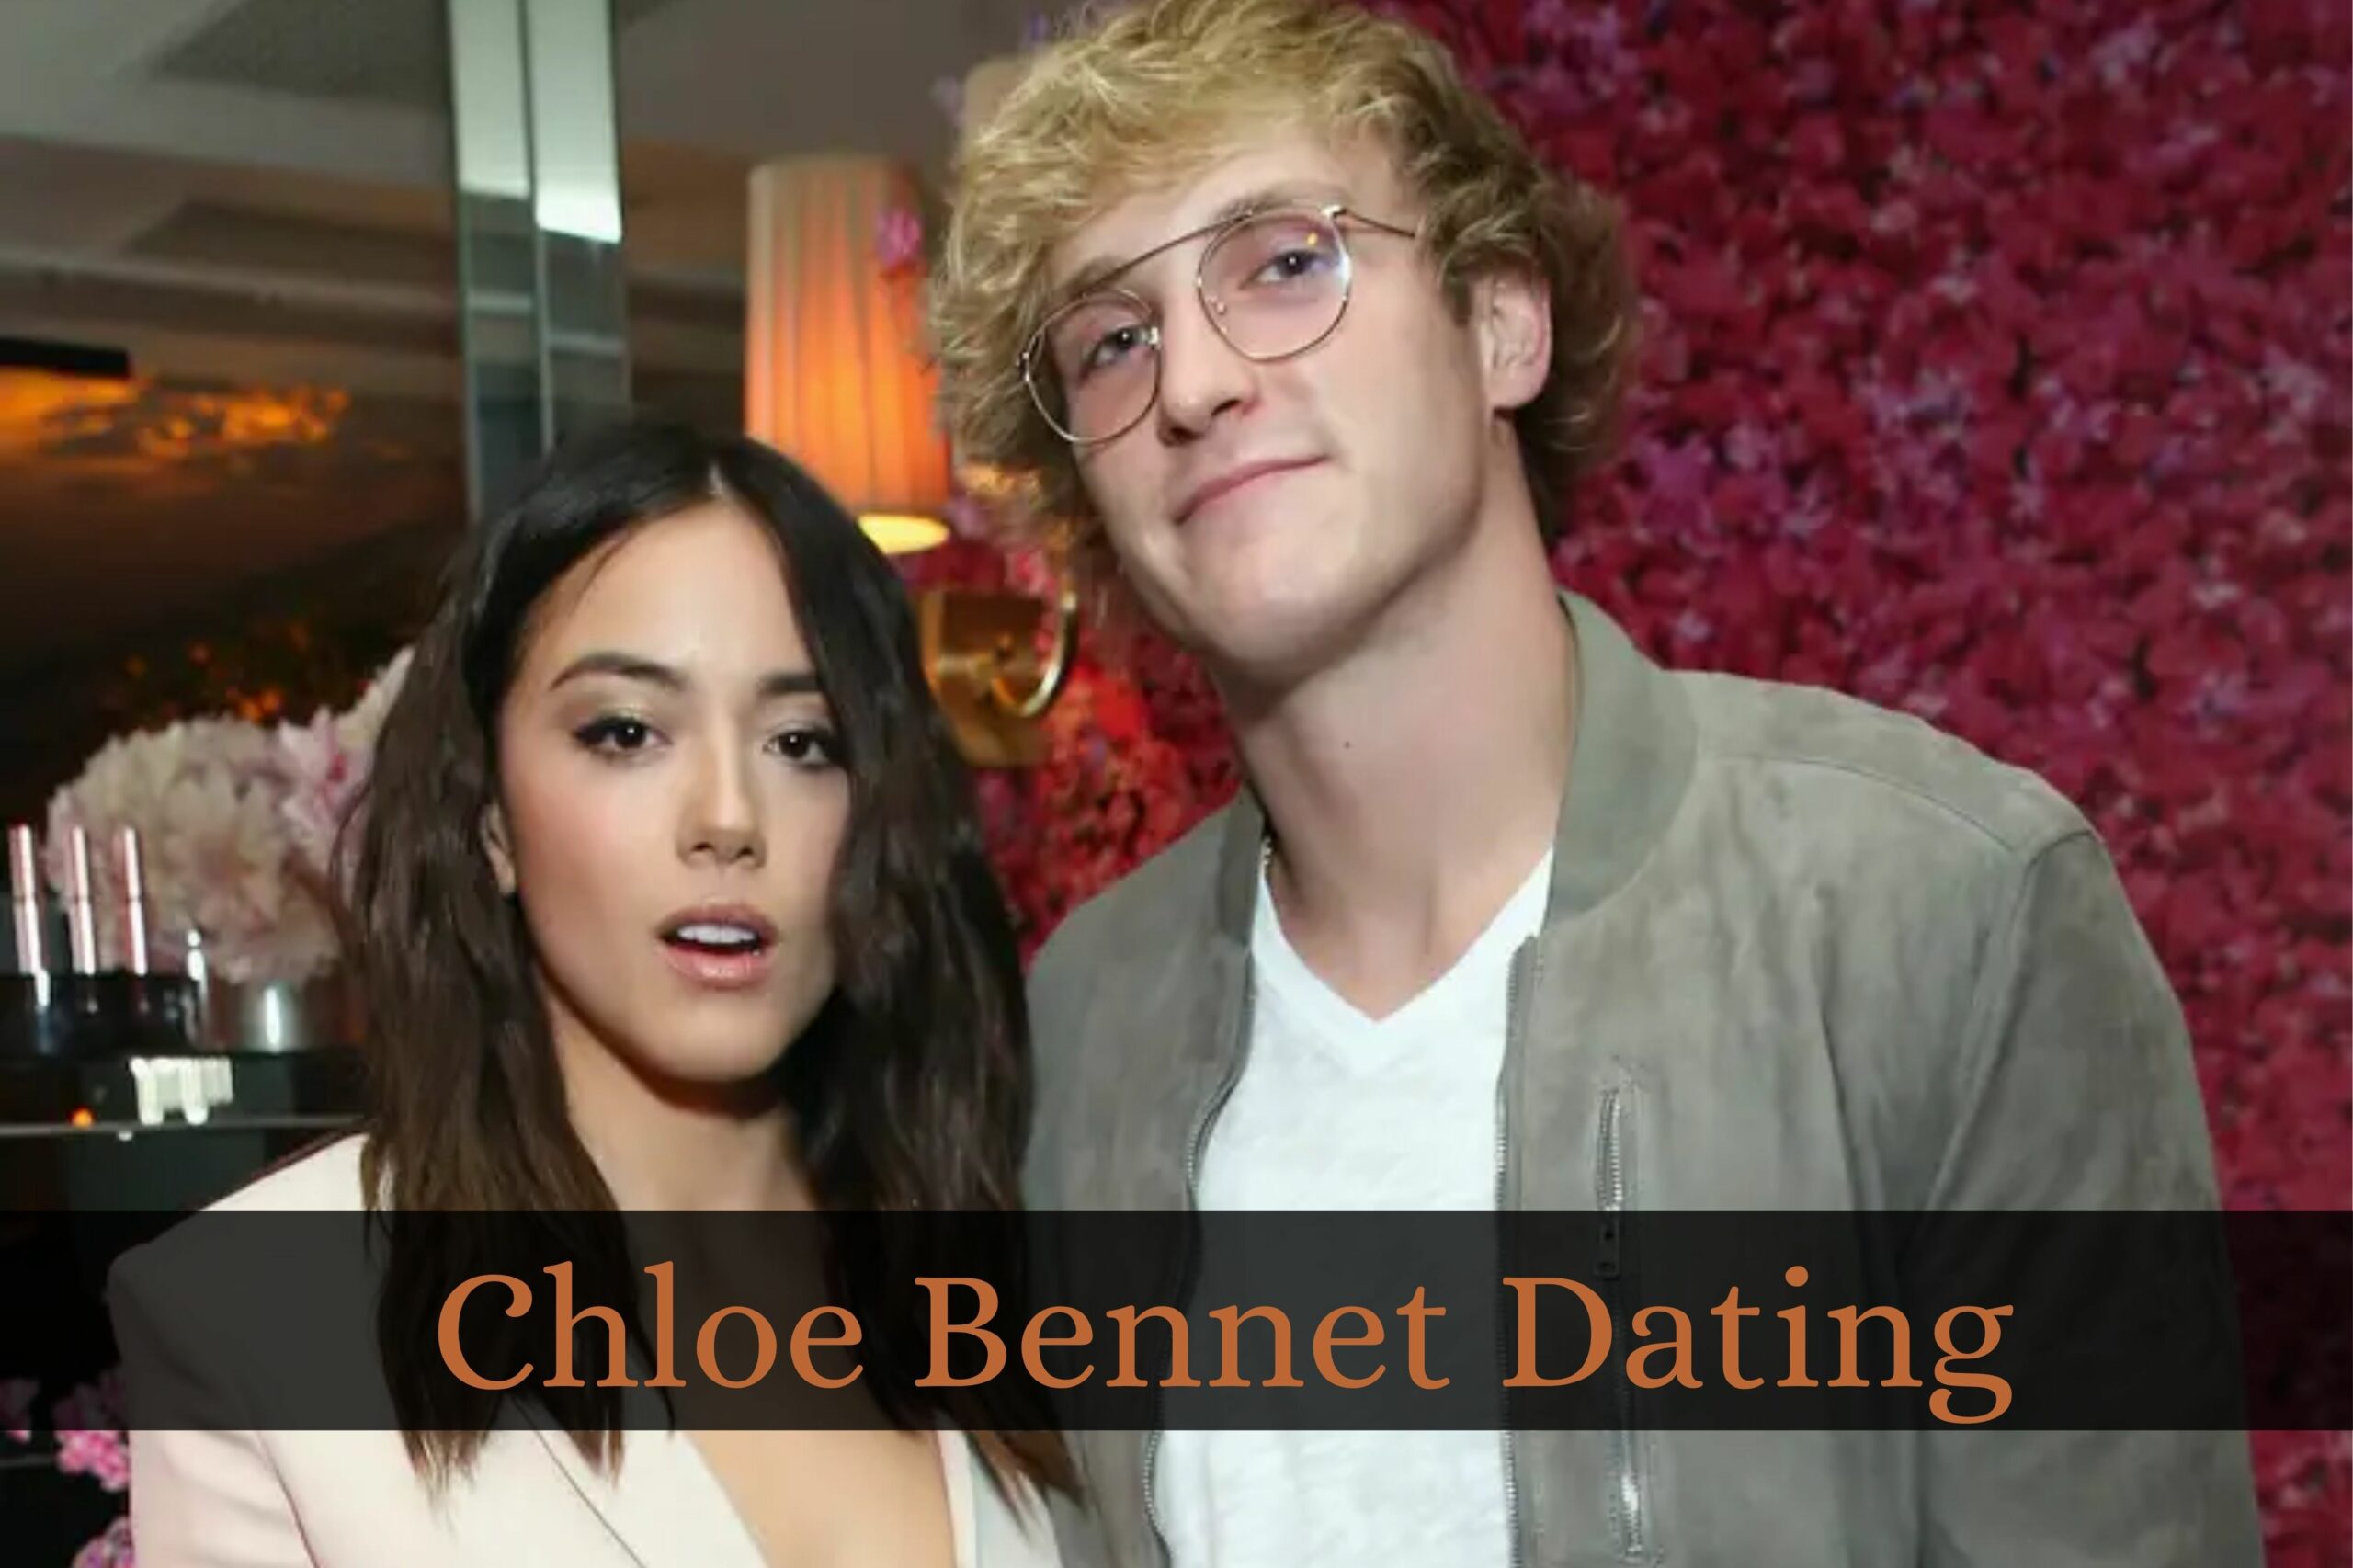 Who Is Chloe Bennet Dating Now? Why Chloe And Chandler Dating Was A Hot Topic?